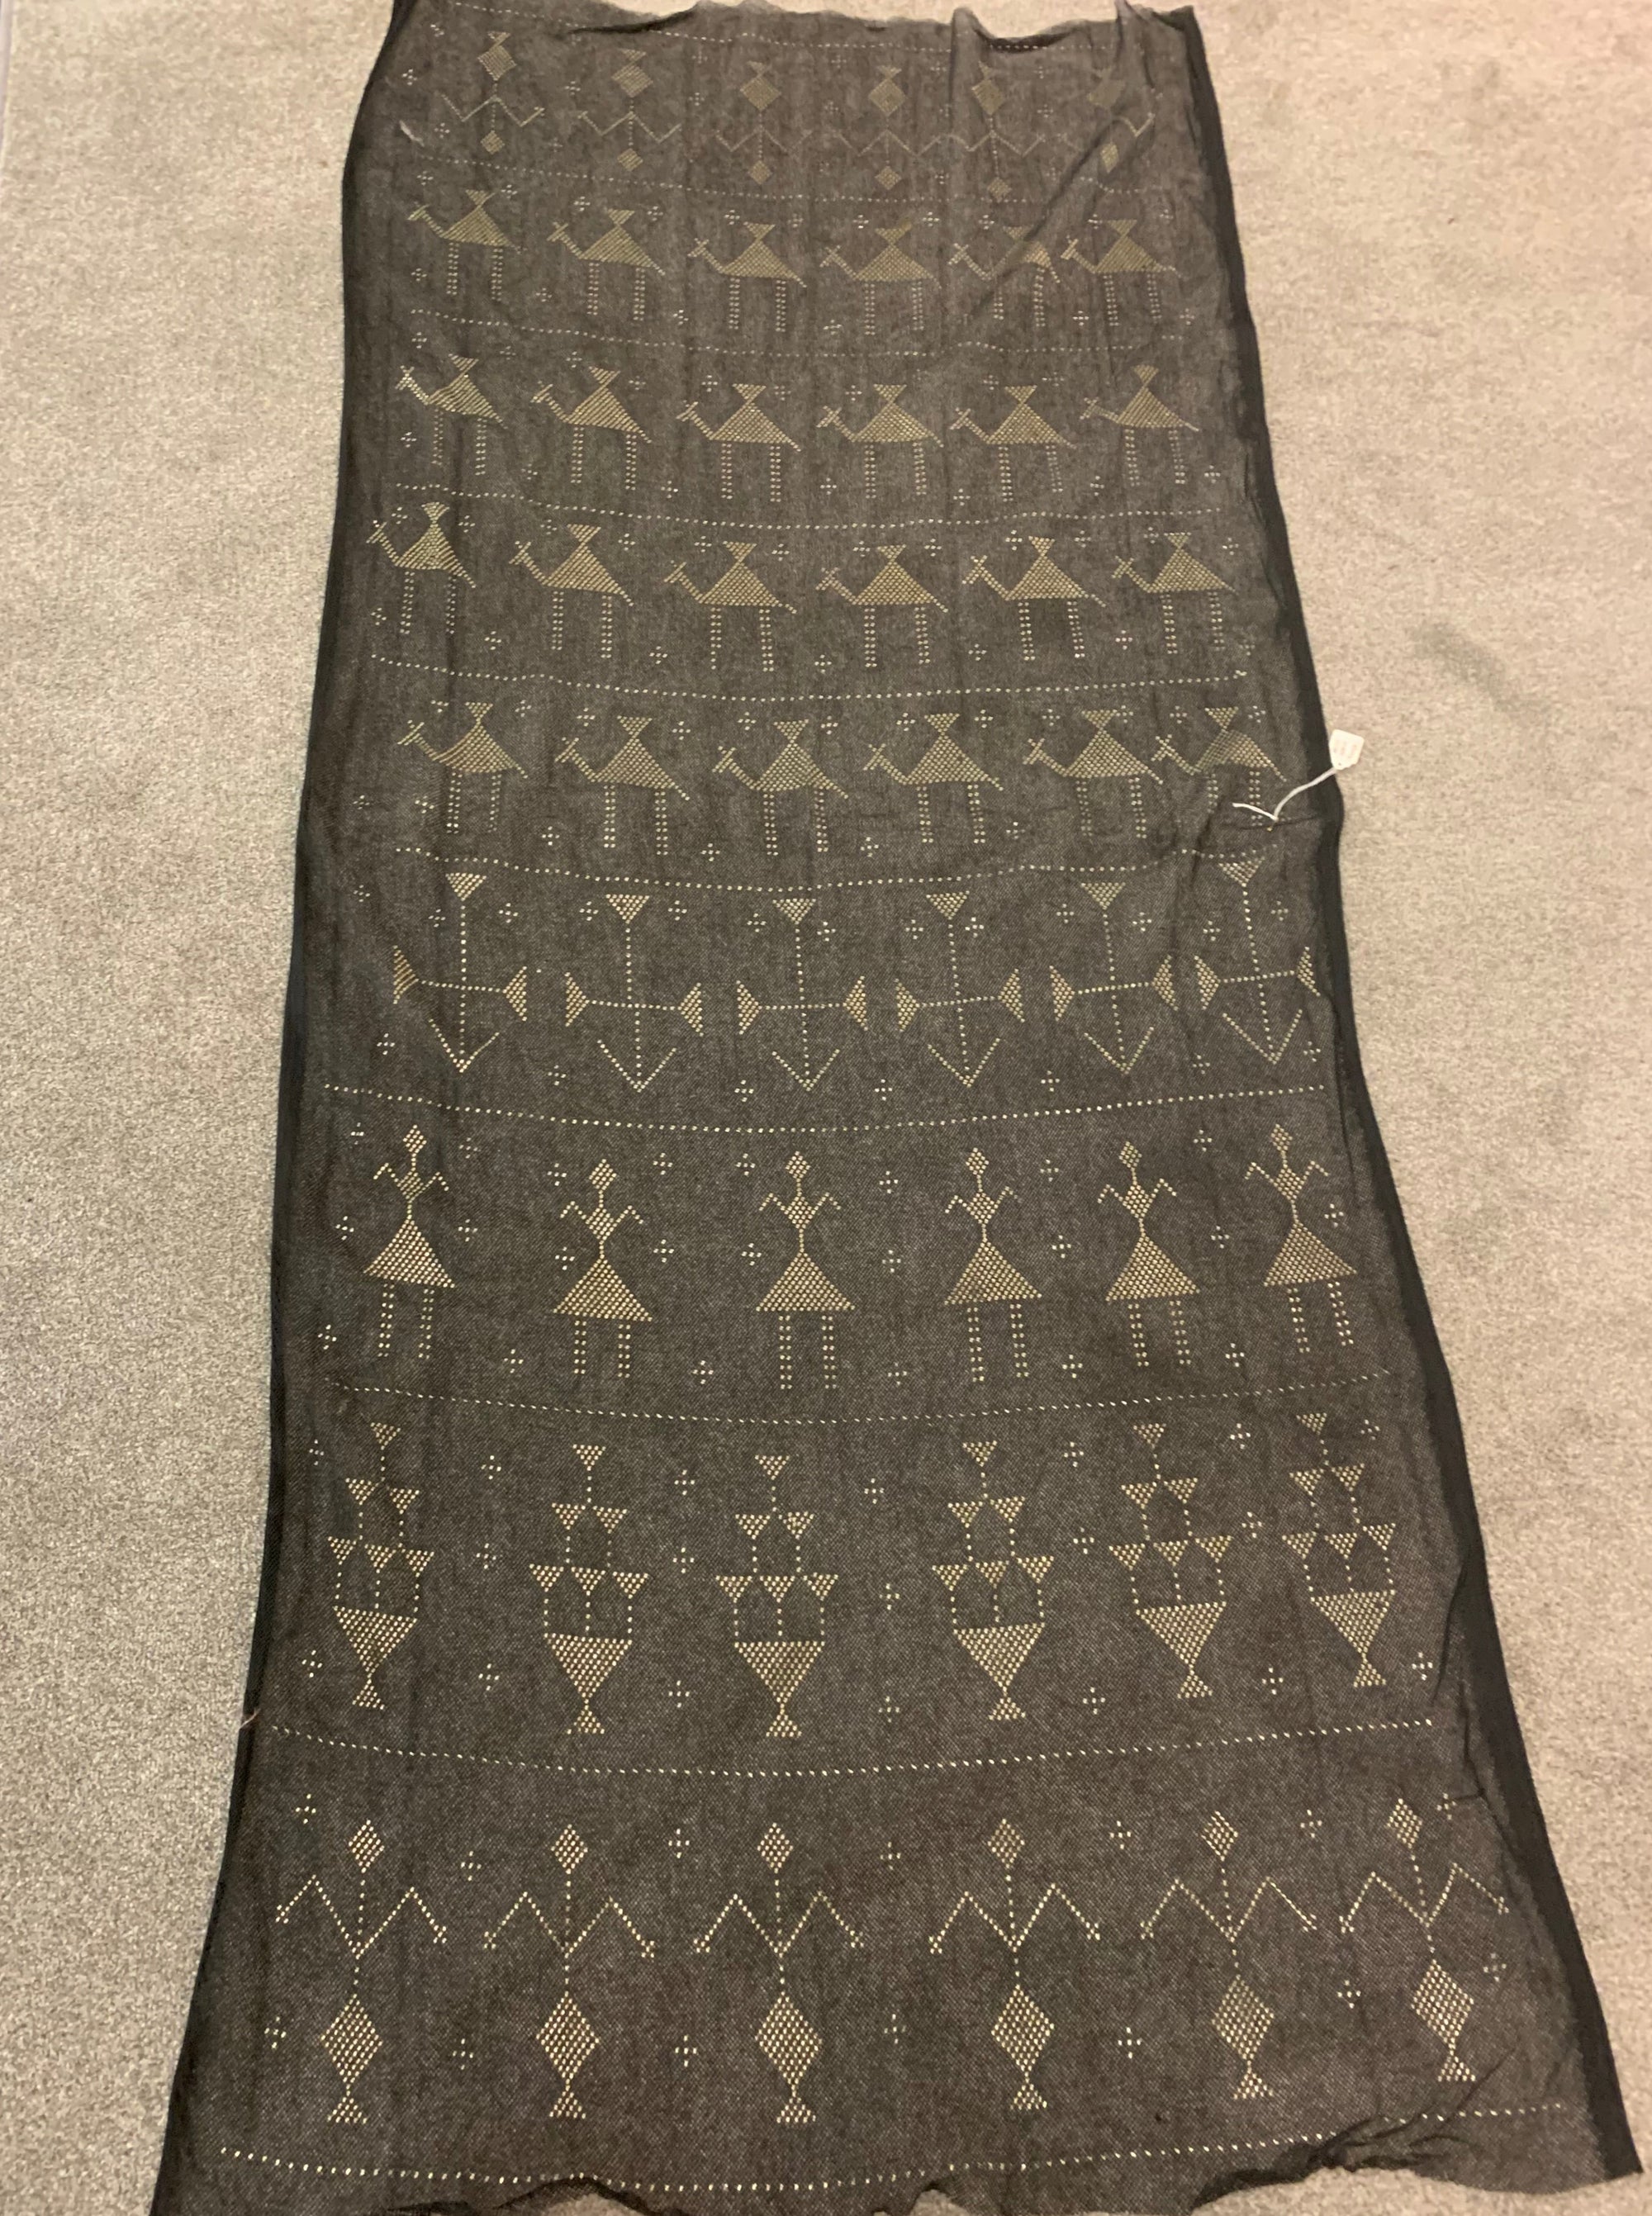 Egyptian Asyut net and silver stole (189 x 88cm)